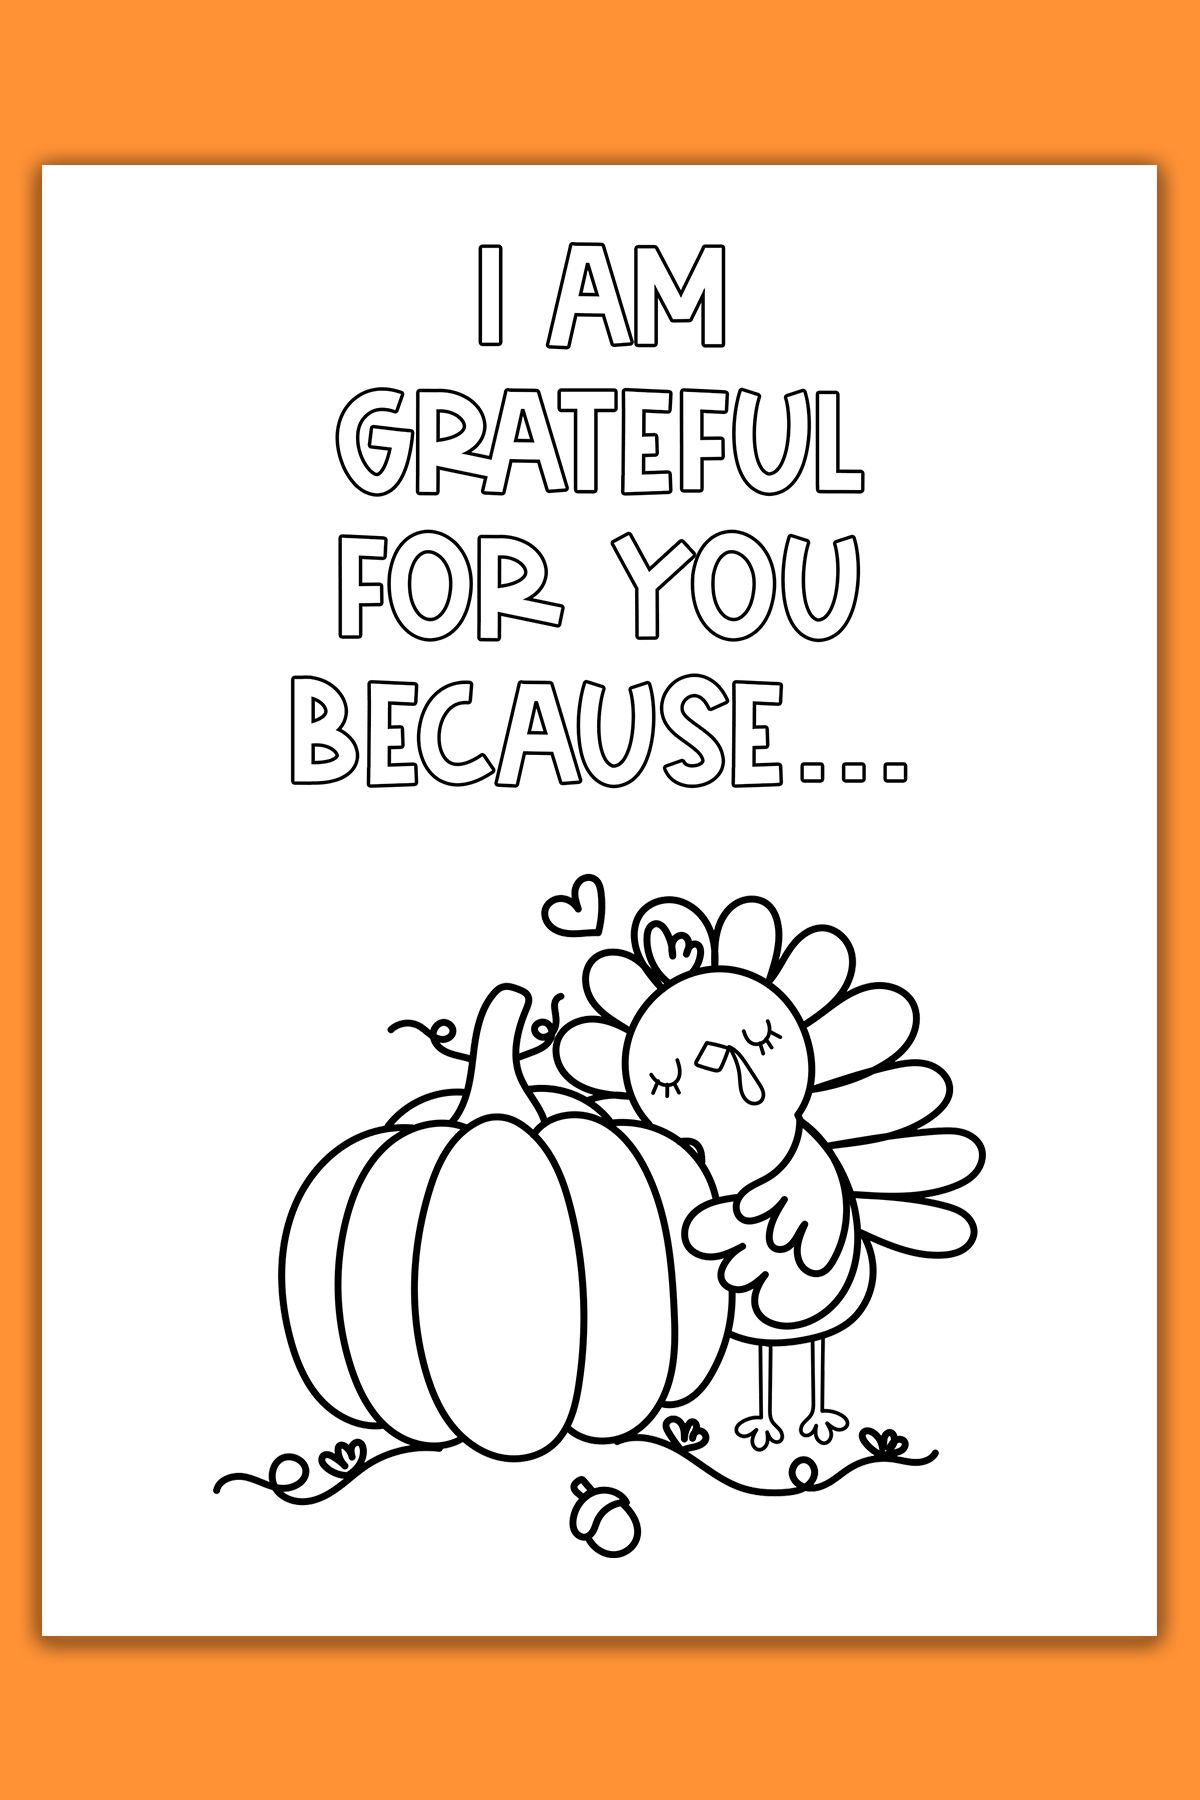 This image shows one of the cards from the thanksgiving cards coloring pages set. It says I am grateful for you because… Below that is an image of a turkey hugging a pumpkin.